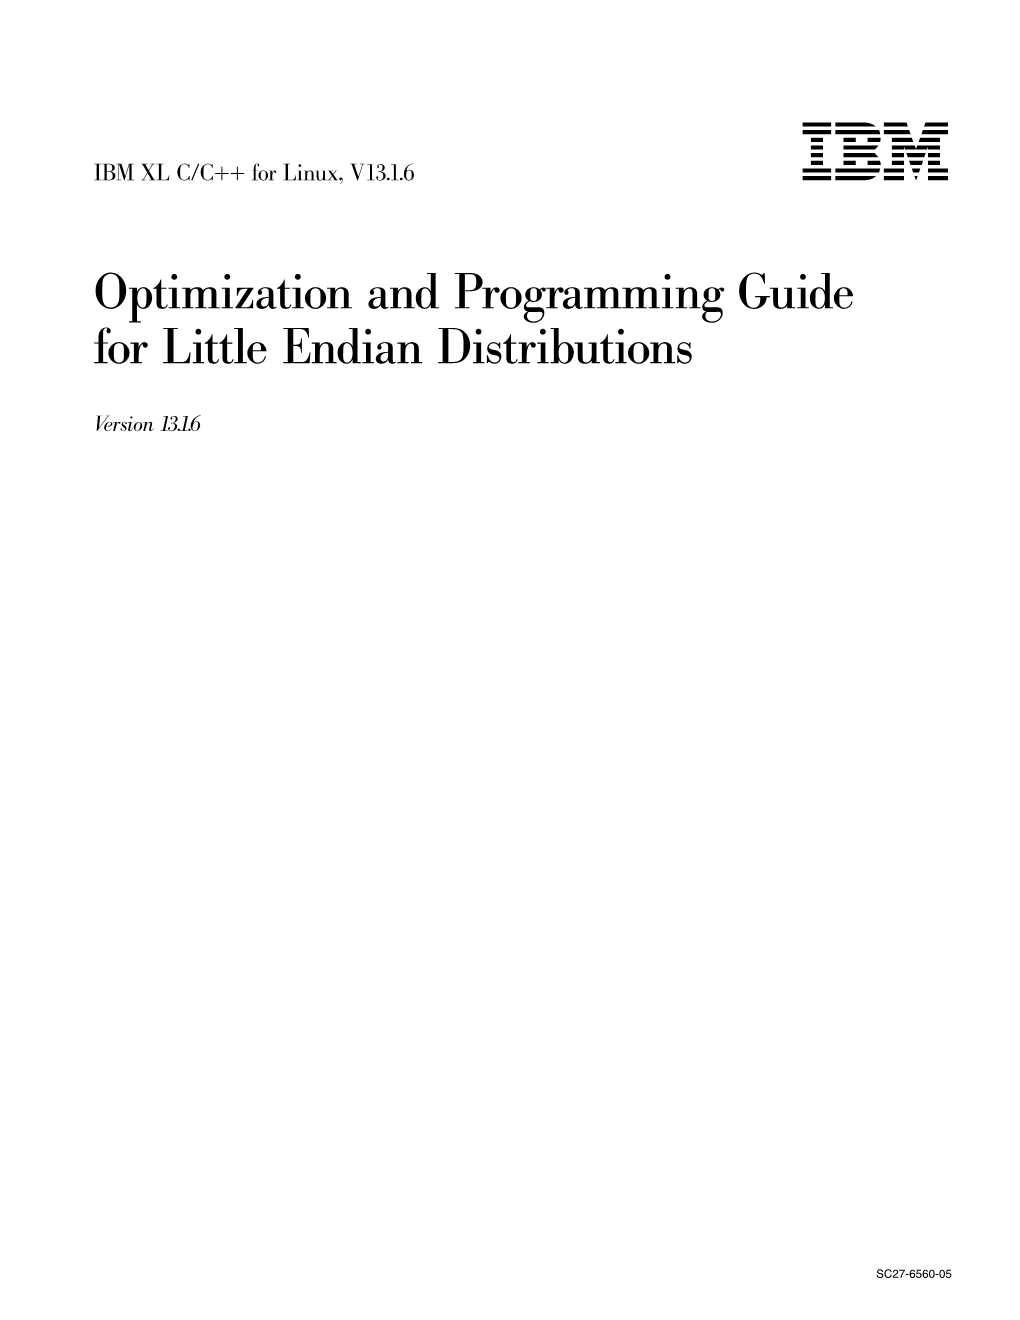 Optimization and Programming Guide for Little Endian Distributions